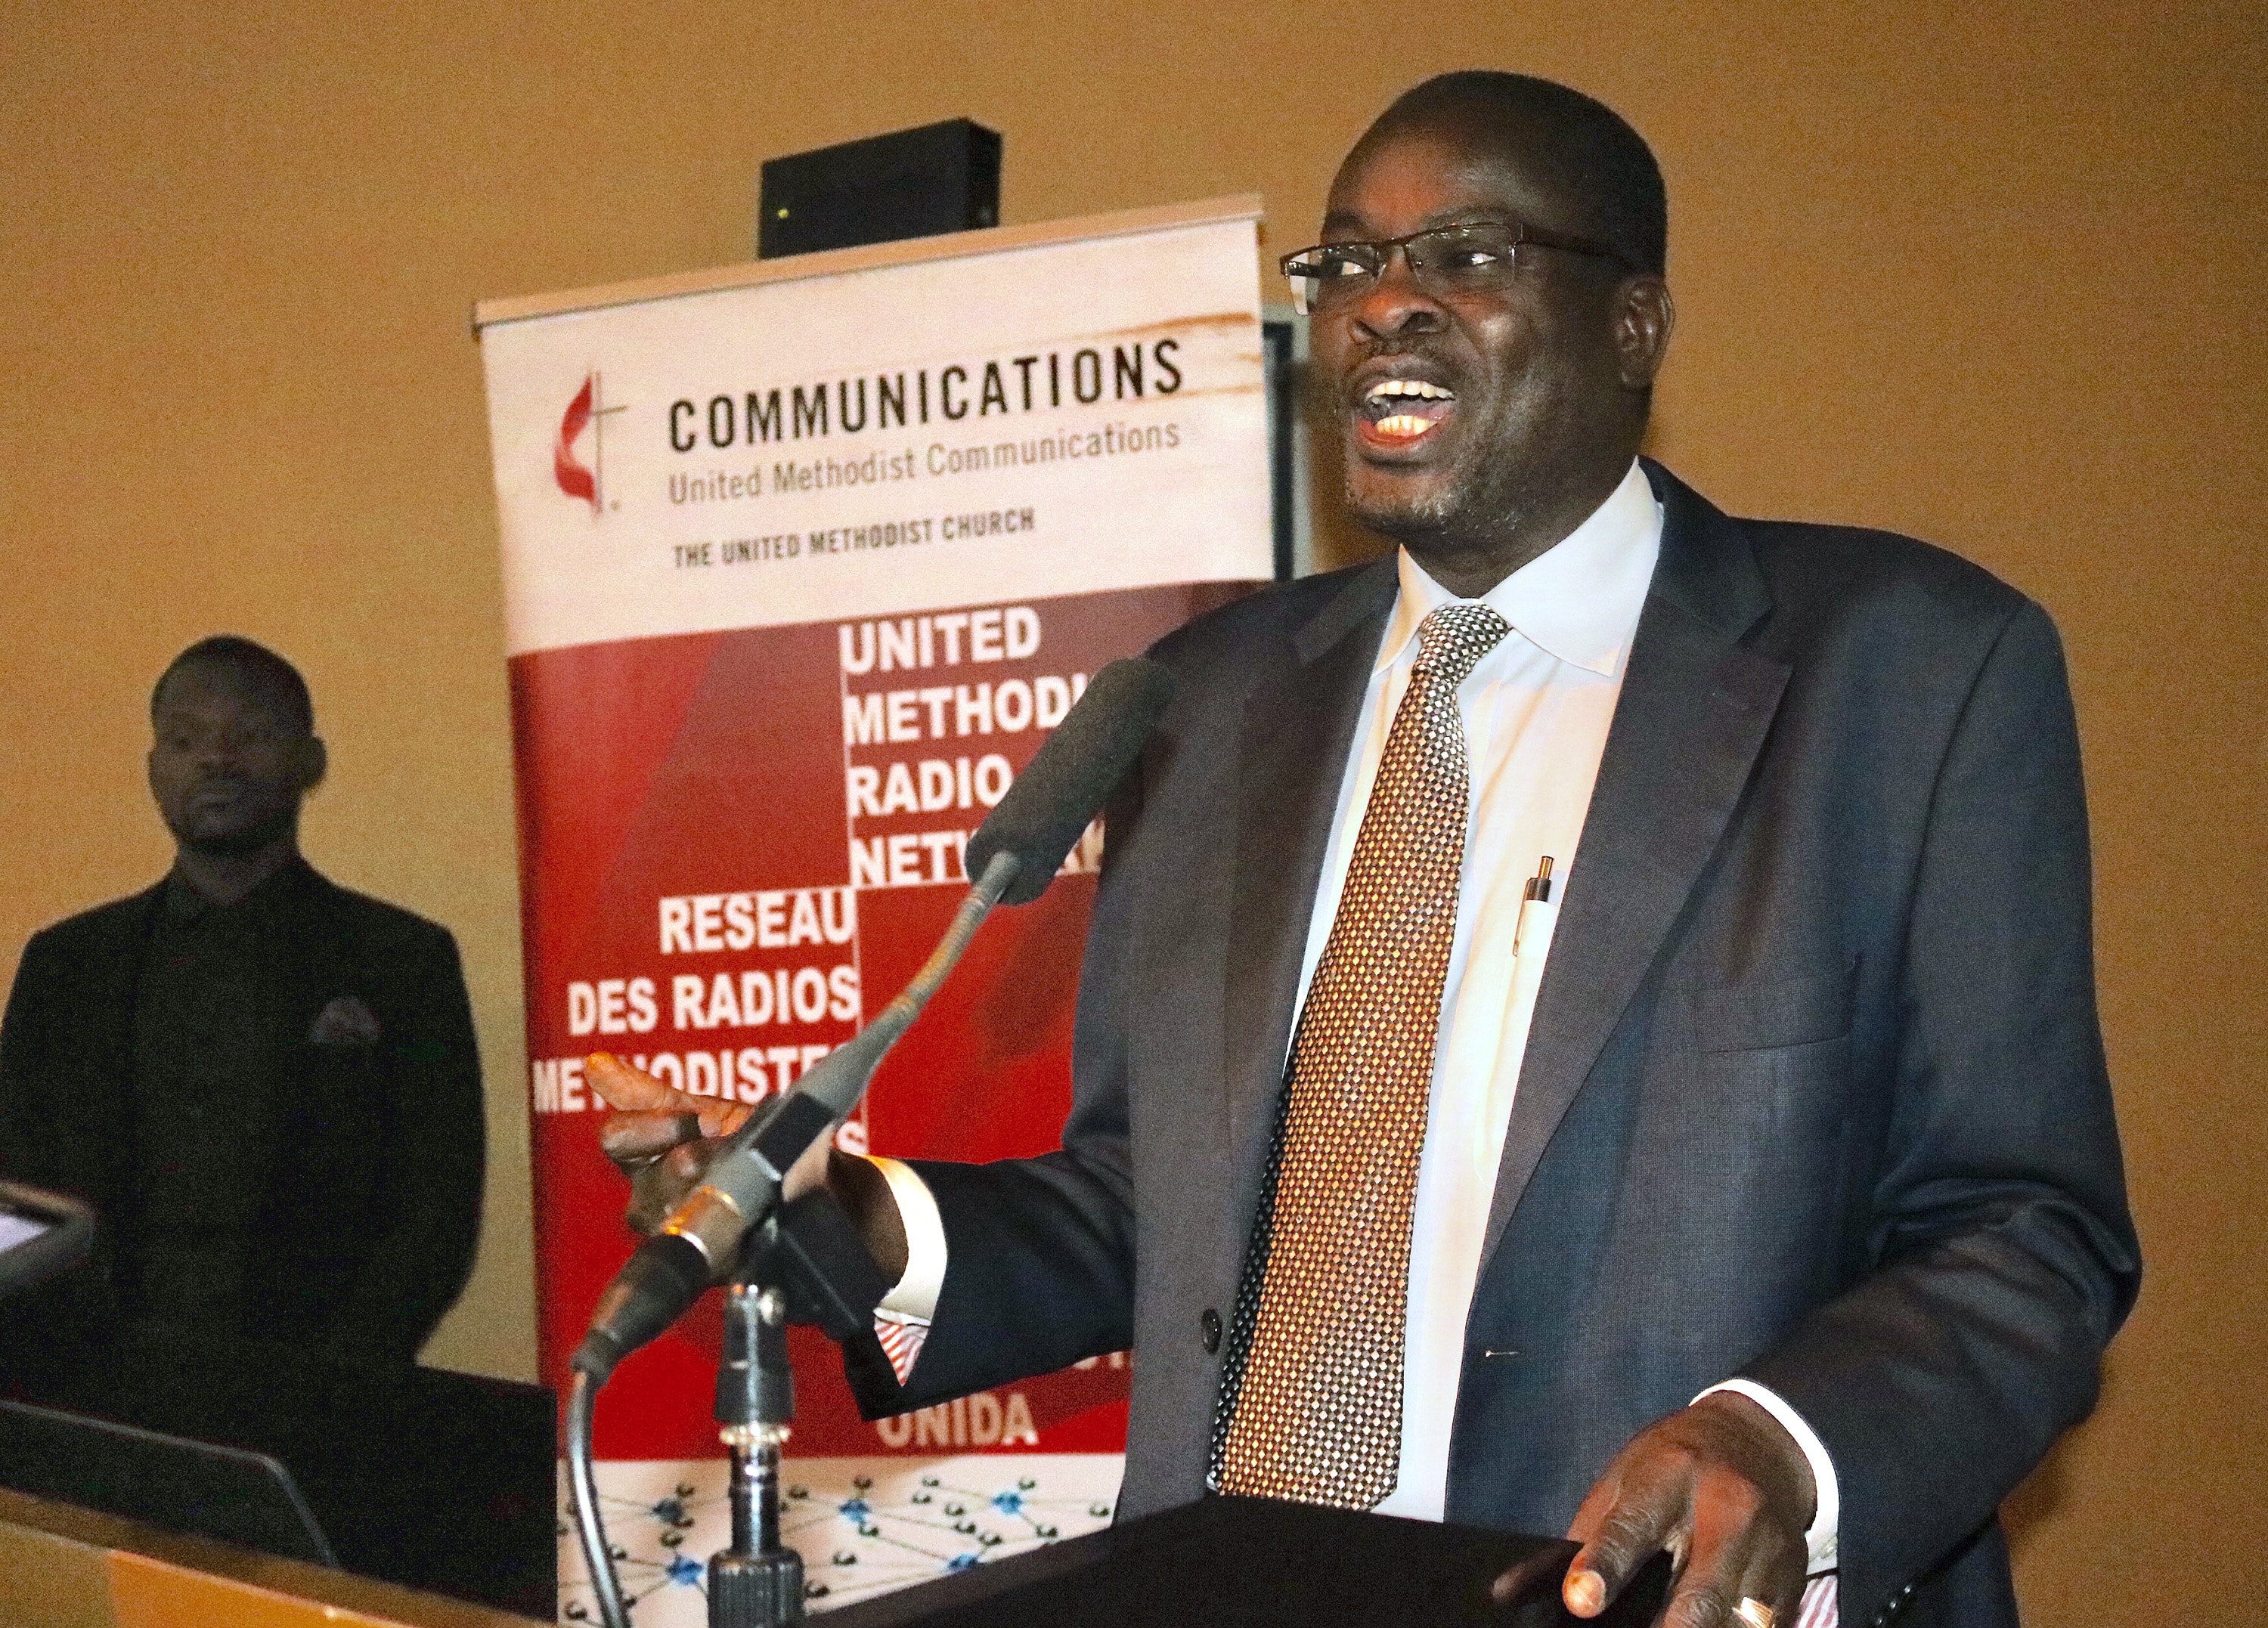 Bishop Daniel Wandabula of the East Africa Episcopal Area called on communicators to “unite the church (rather) than perpetuate divisions” while speaking at the United Methodist Radio Network annual meeting, April 25-27, in Kampala, Uganda. Photo by the Rev. Taurai Emmanuel Maforo.